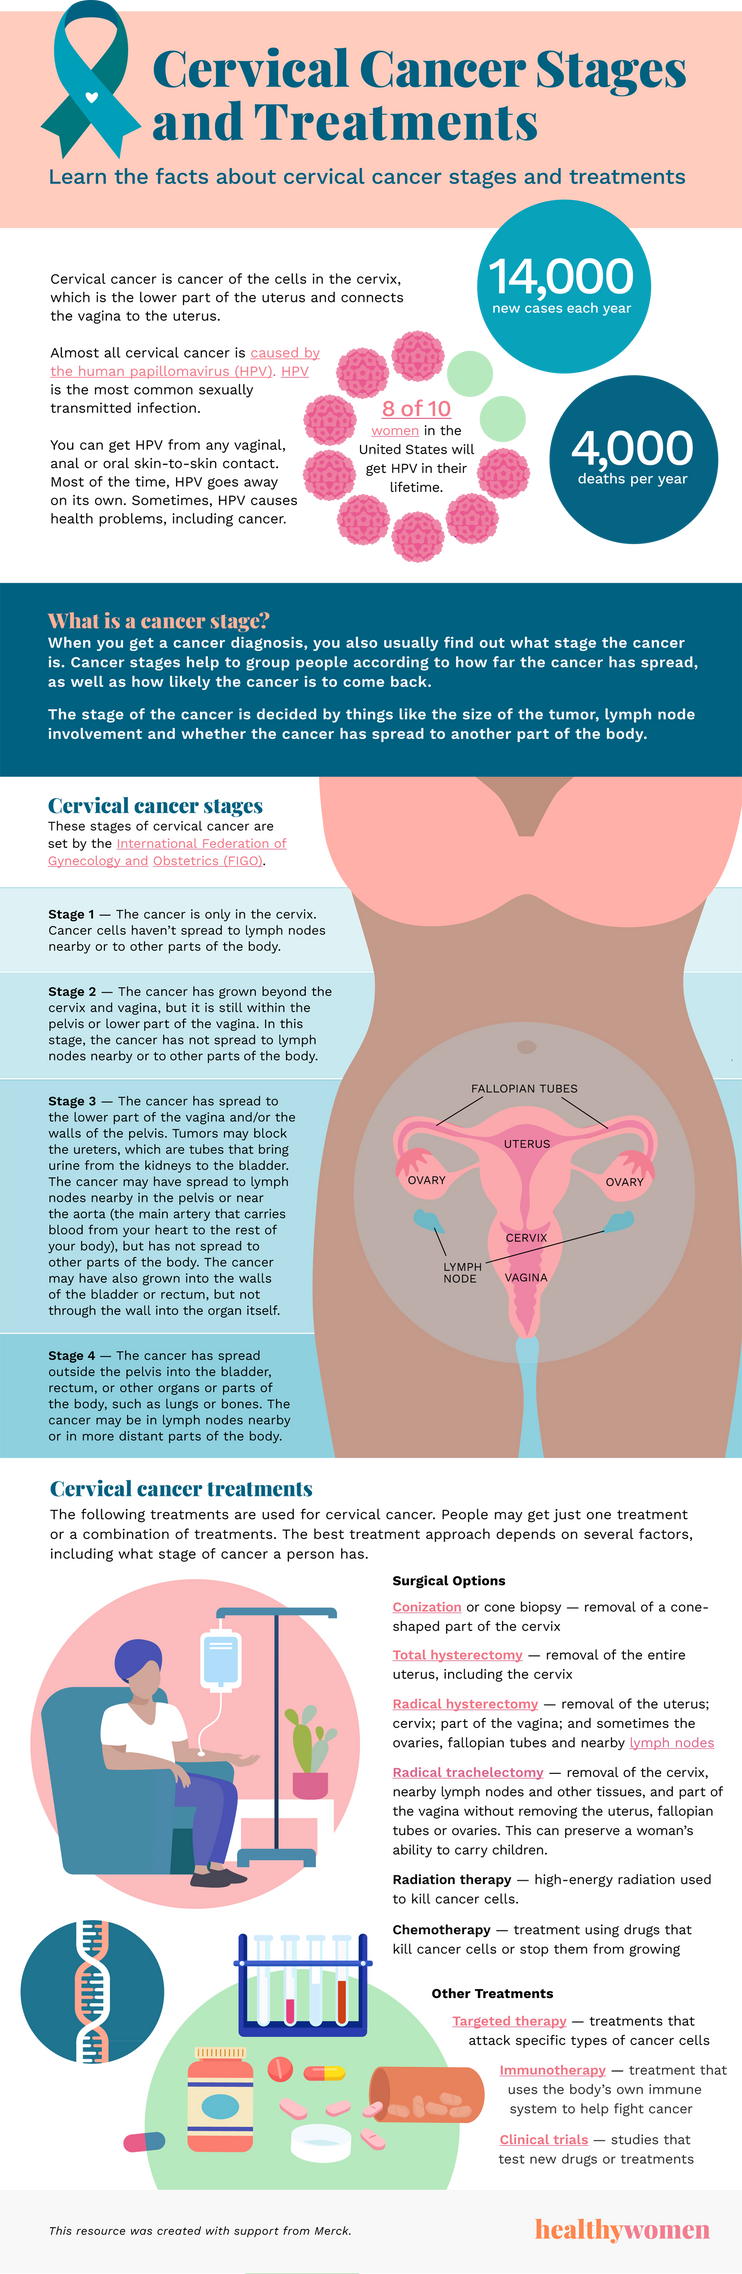 Best Doctor For Cervical Cancer Treatment In India